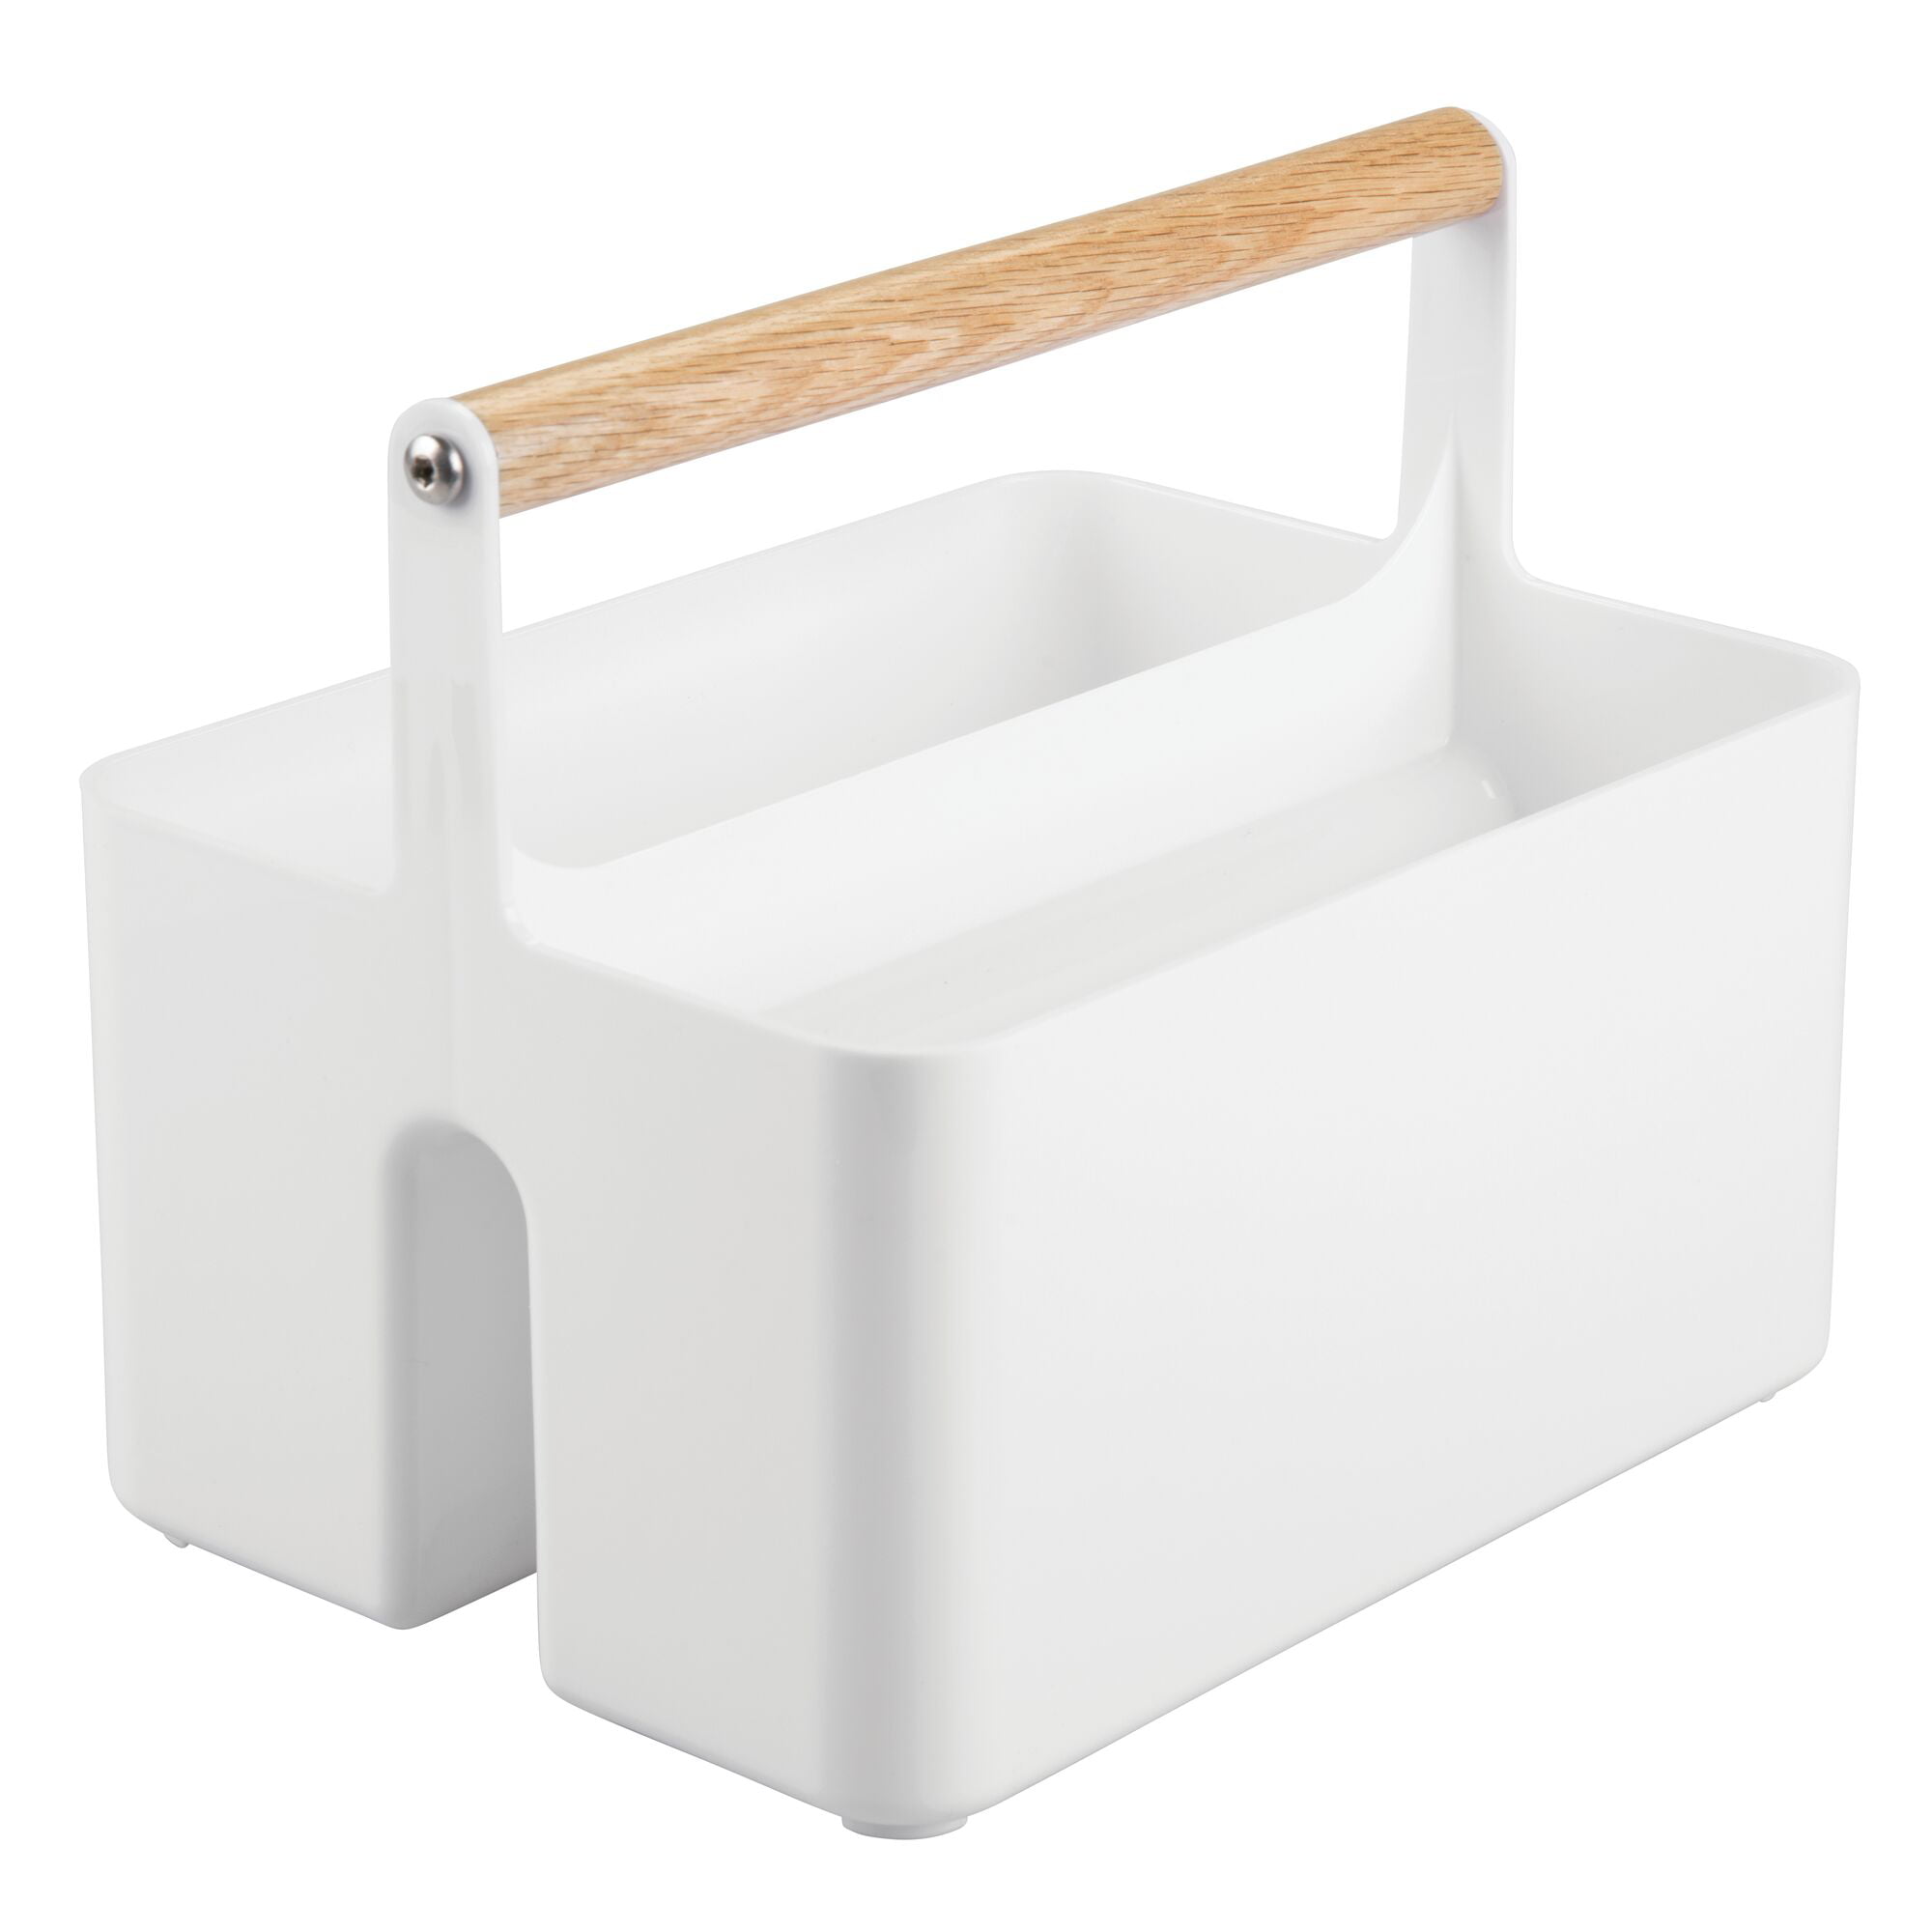 mDesign Plastic Divided Shower Caddy Organizer, Bamboo Handle